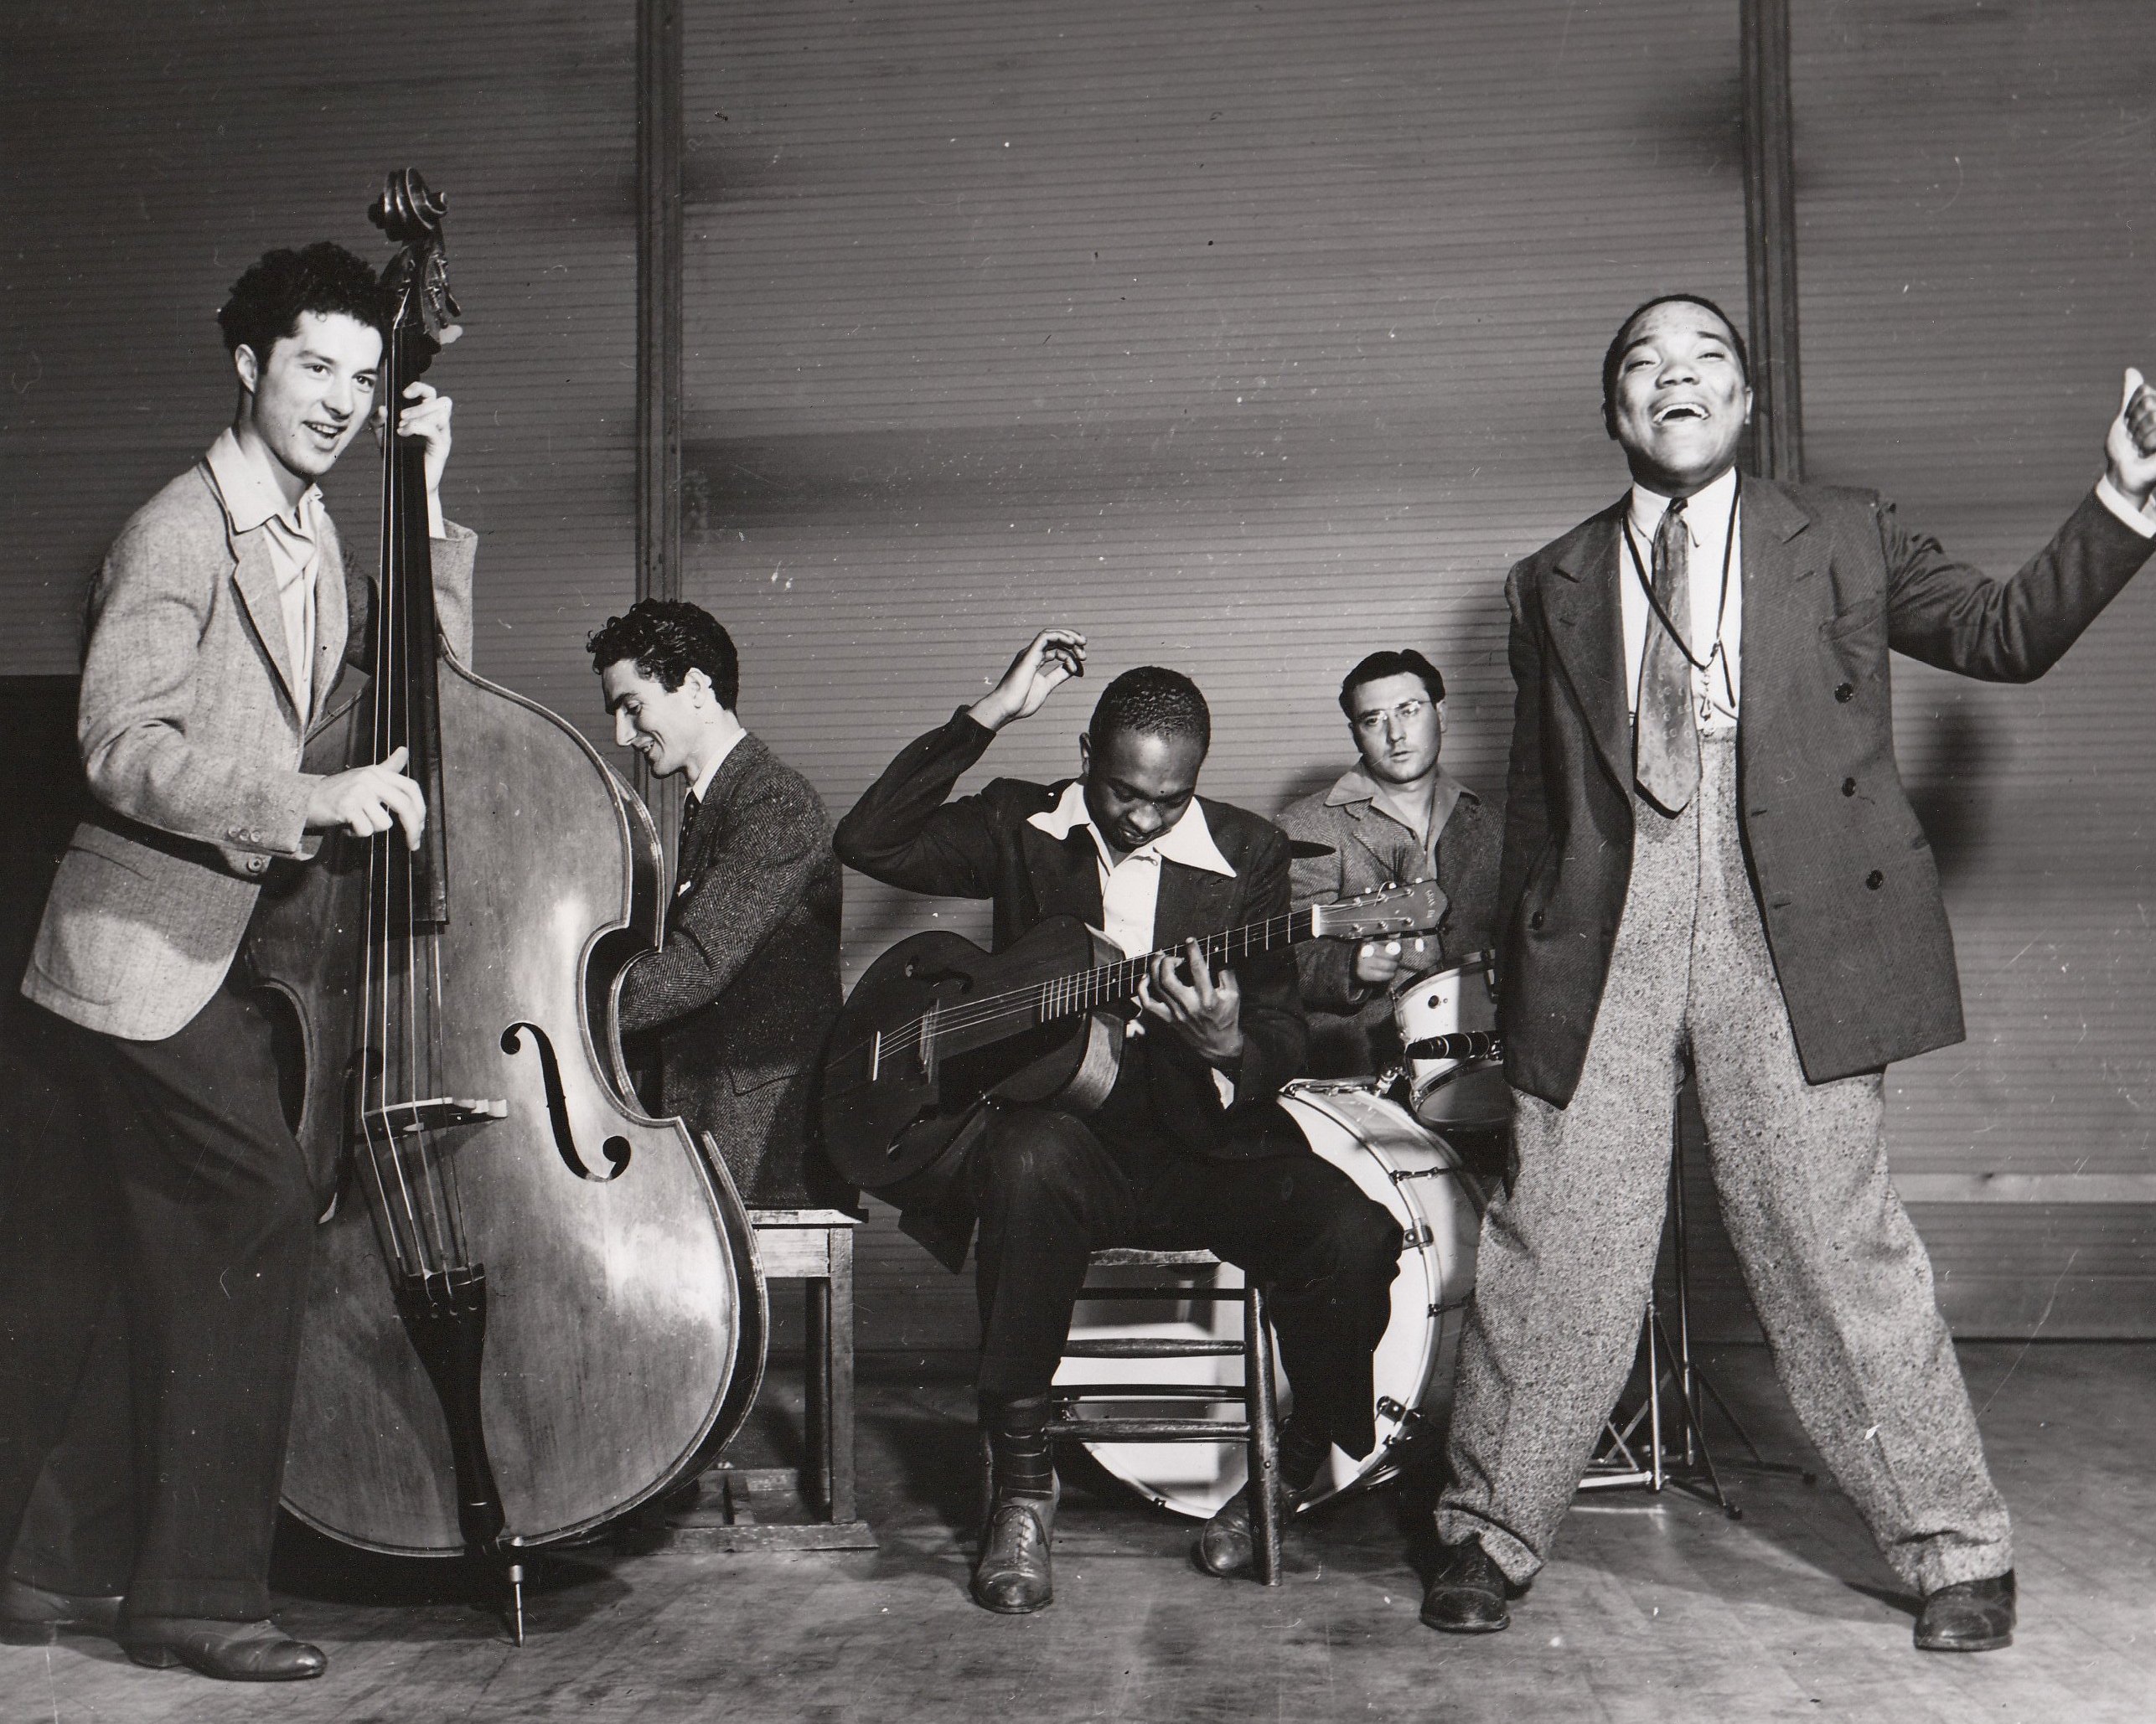 (left to right) Lee Cretarolo, Paul Dunlap, Hall Brant, Jimmy Pulara, and Terry Cruse are glad to make music in an NYA band for their fellow Los Angeles residents. Photo courtesy of the National Archives (ca. 1935-1943).